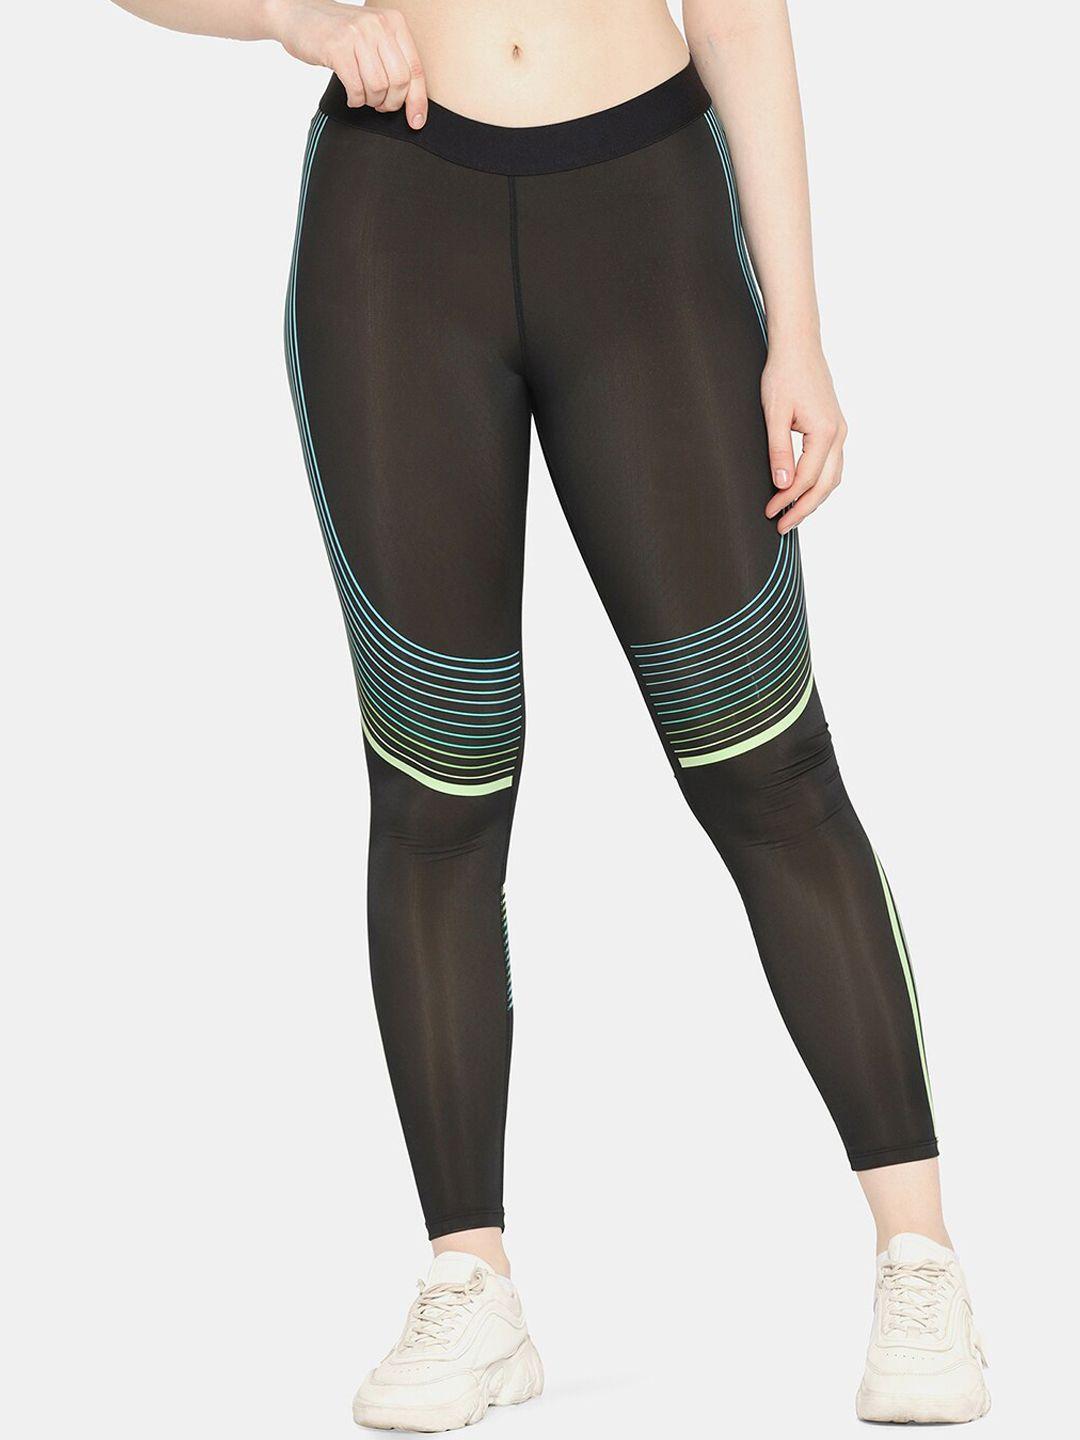 da-intimo-women-printed-dry-fit-ankle-length-training-or-gym-sports-tights